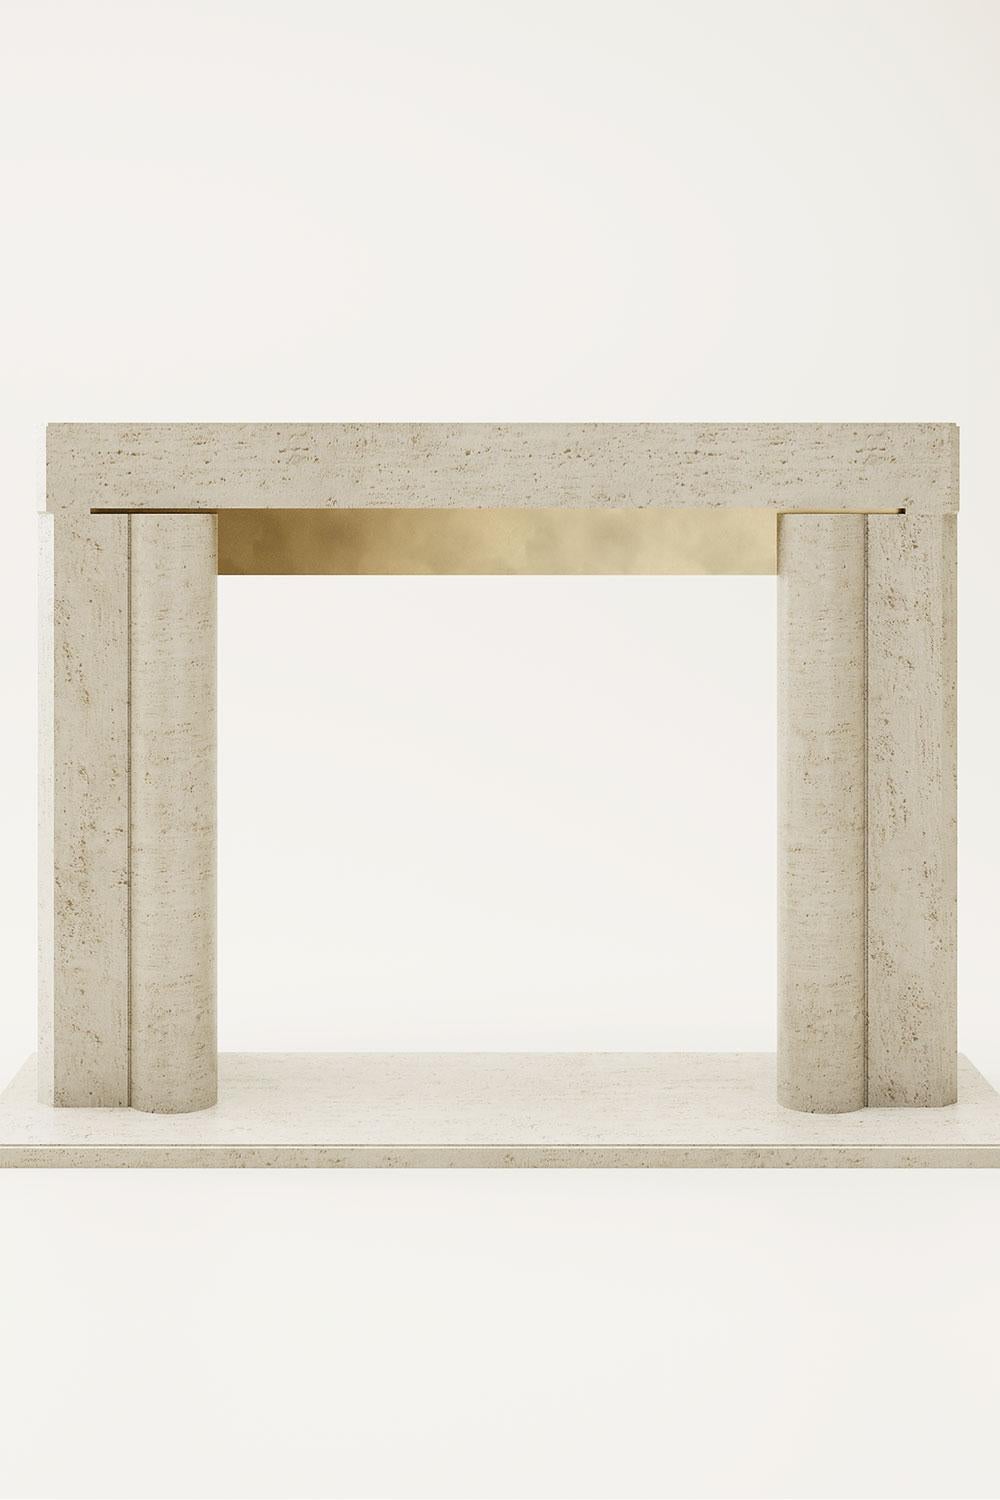 Impero Fireplace by Andrea Bonini
Limited Edition
Dimensions: D 51 x W 100 x H 130 cm.
Materials: Travertine marble and Natural brushed brass.

Made in Italy. Limited series, numbered and signed pieces. Custom size or finish on request. Also